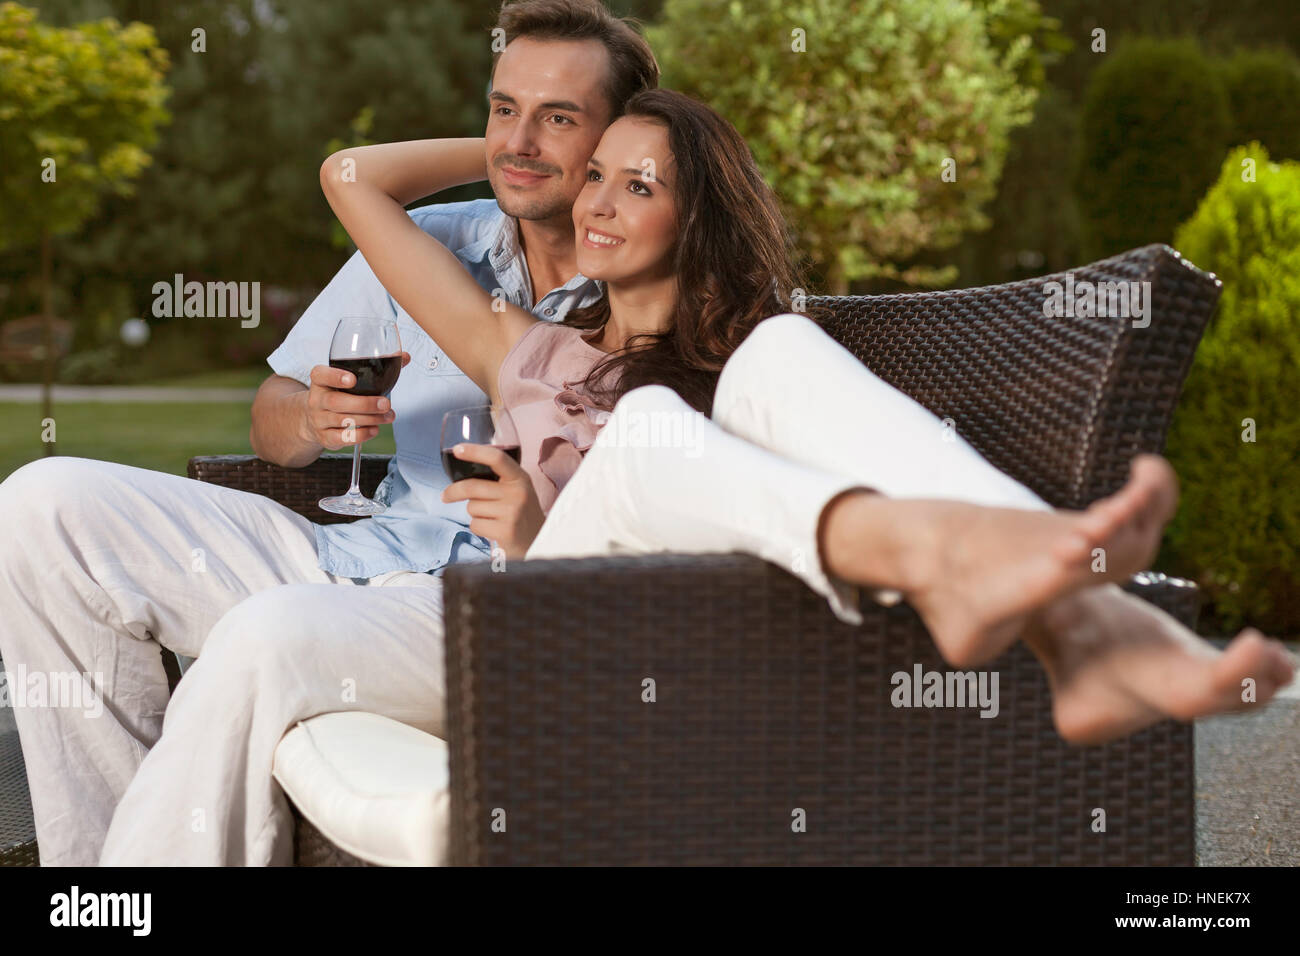 Romantic young couple on easy chair looking away in park Stock Photo